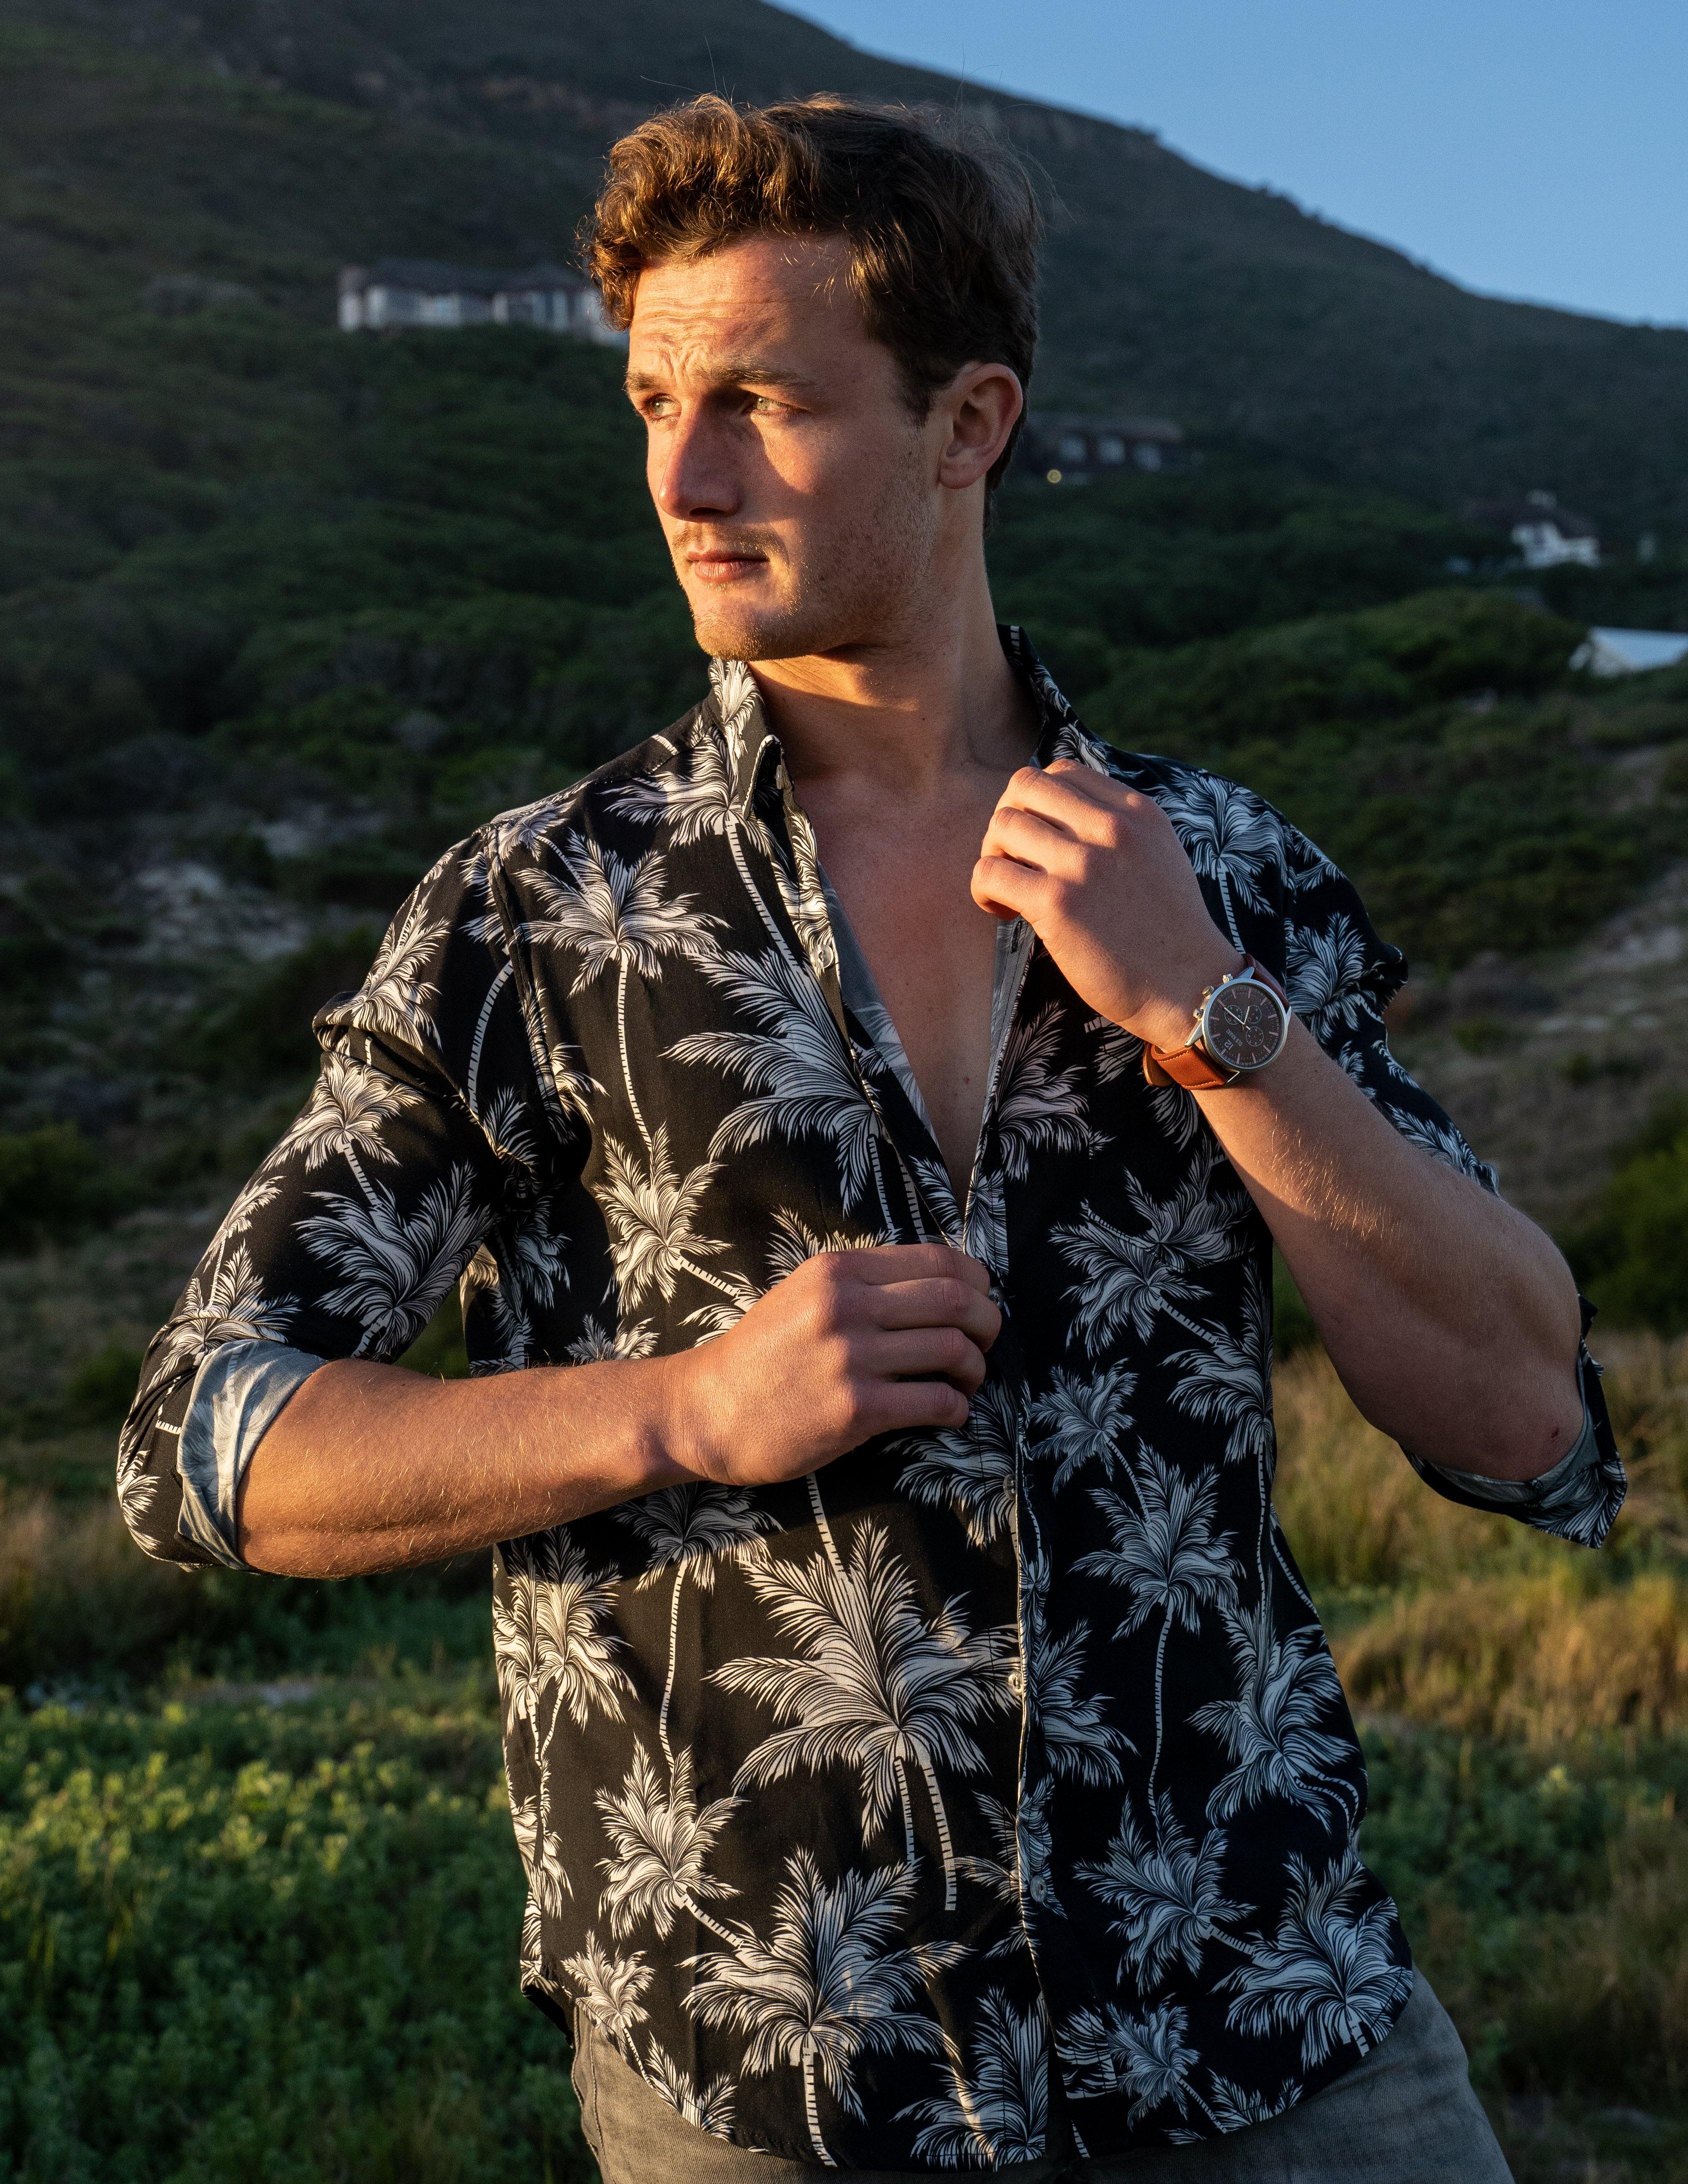 Long Sleeve Shirt - PalmtasticStrange ParadiseStrange Paradise
Men's Long Sleeve Shirt - Palmtastic is a slim fit shirt with button up fastening and a single chest pocket. The shirt showcases a smart casual look and is paired eMen's Long Sleeve Shirt - Palmtastic